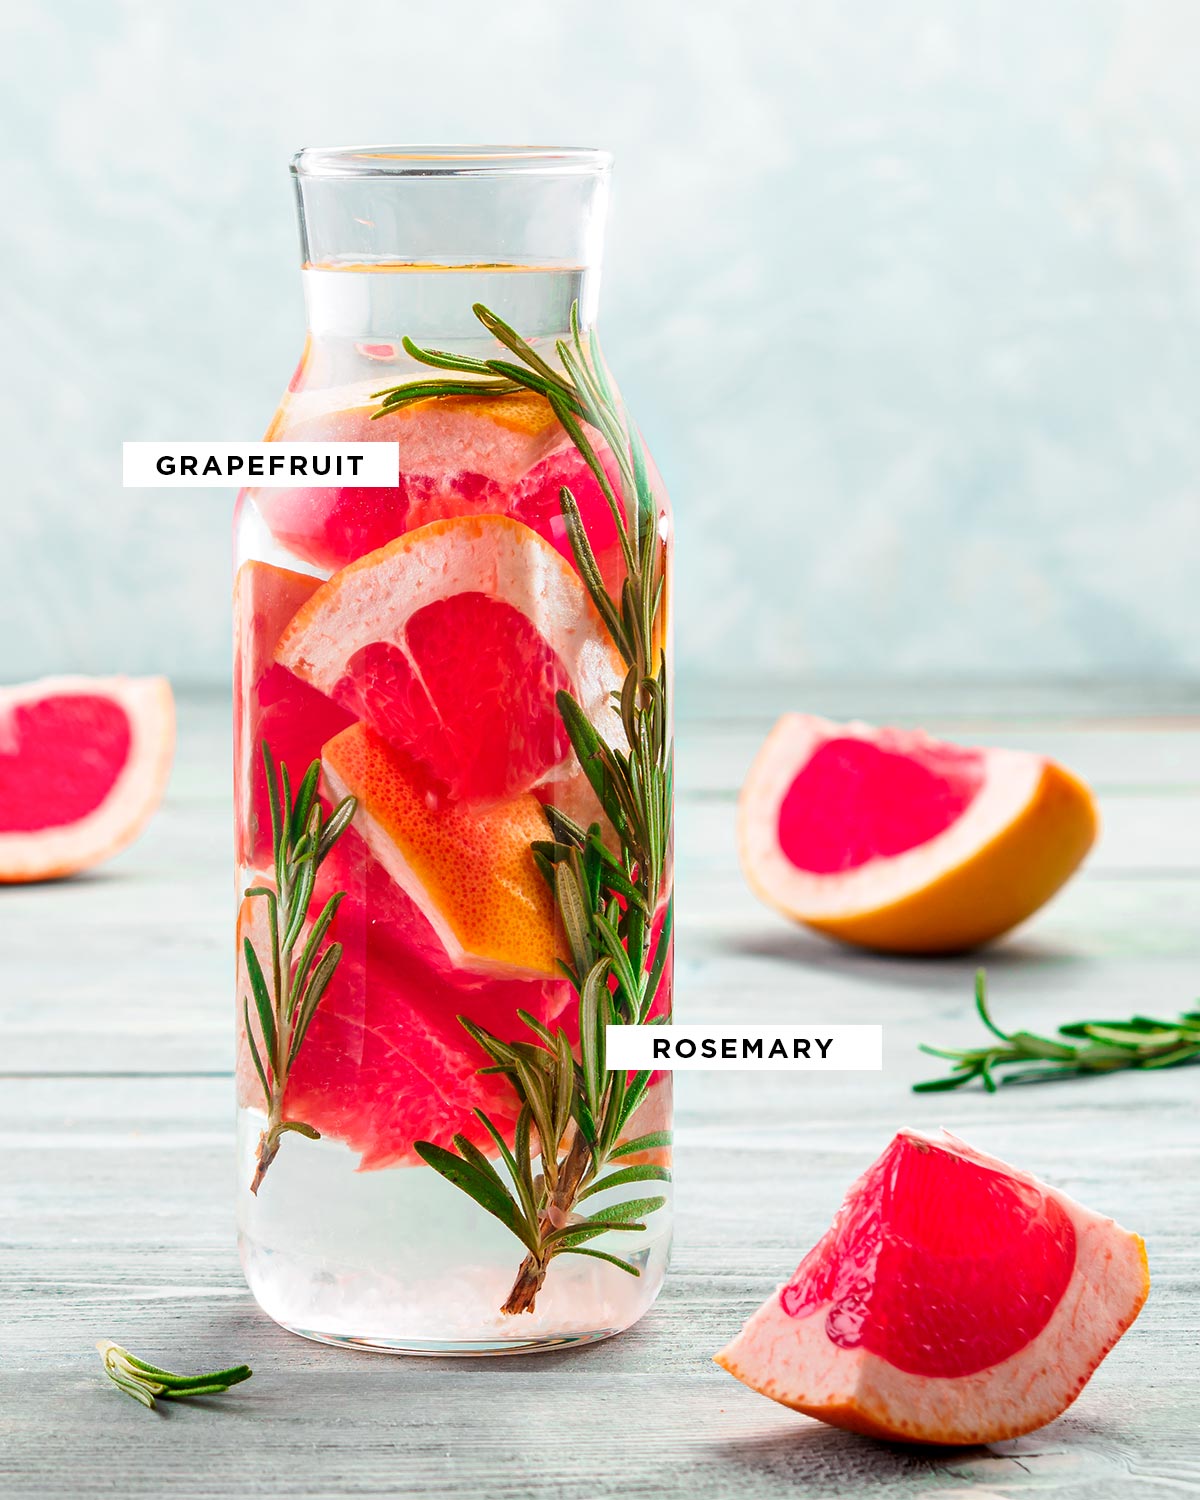 labeled ingredients for detox water including grapefruit and rosemary in a liter-sized glass container.